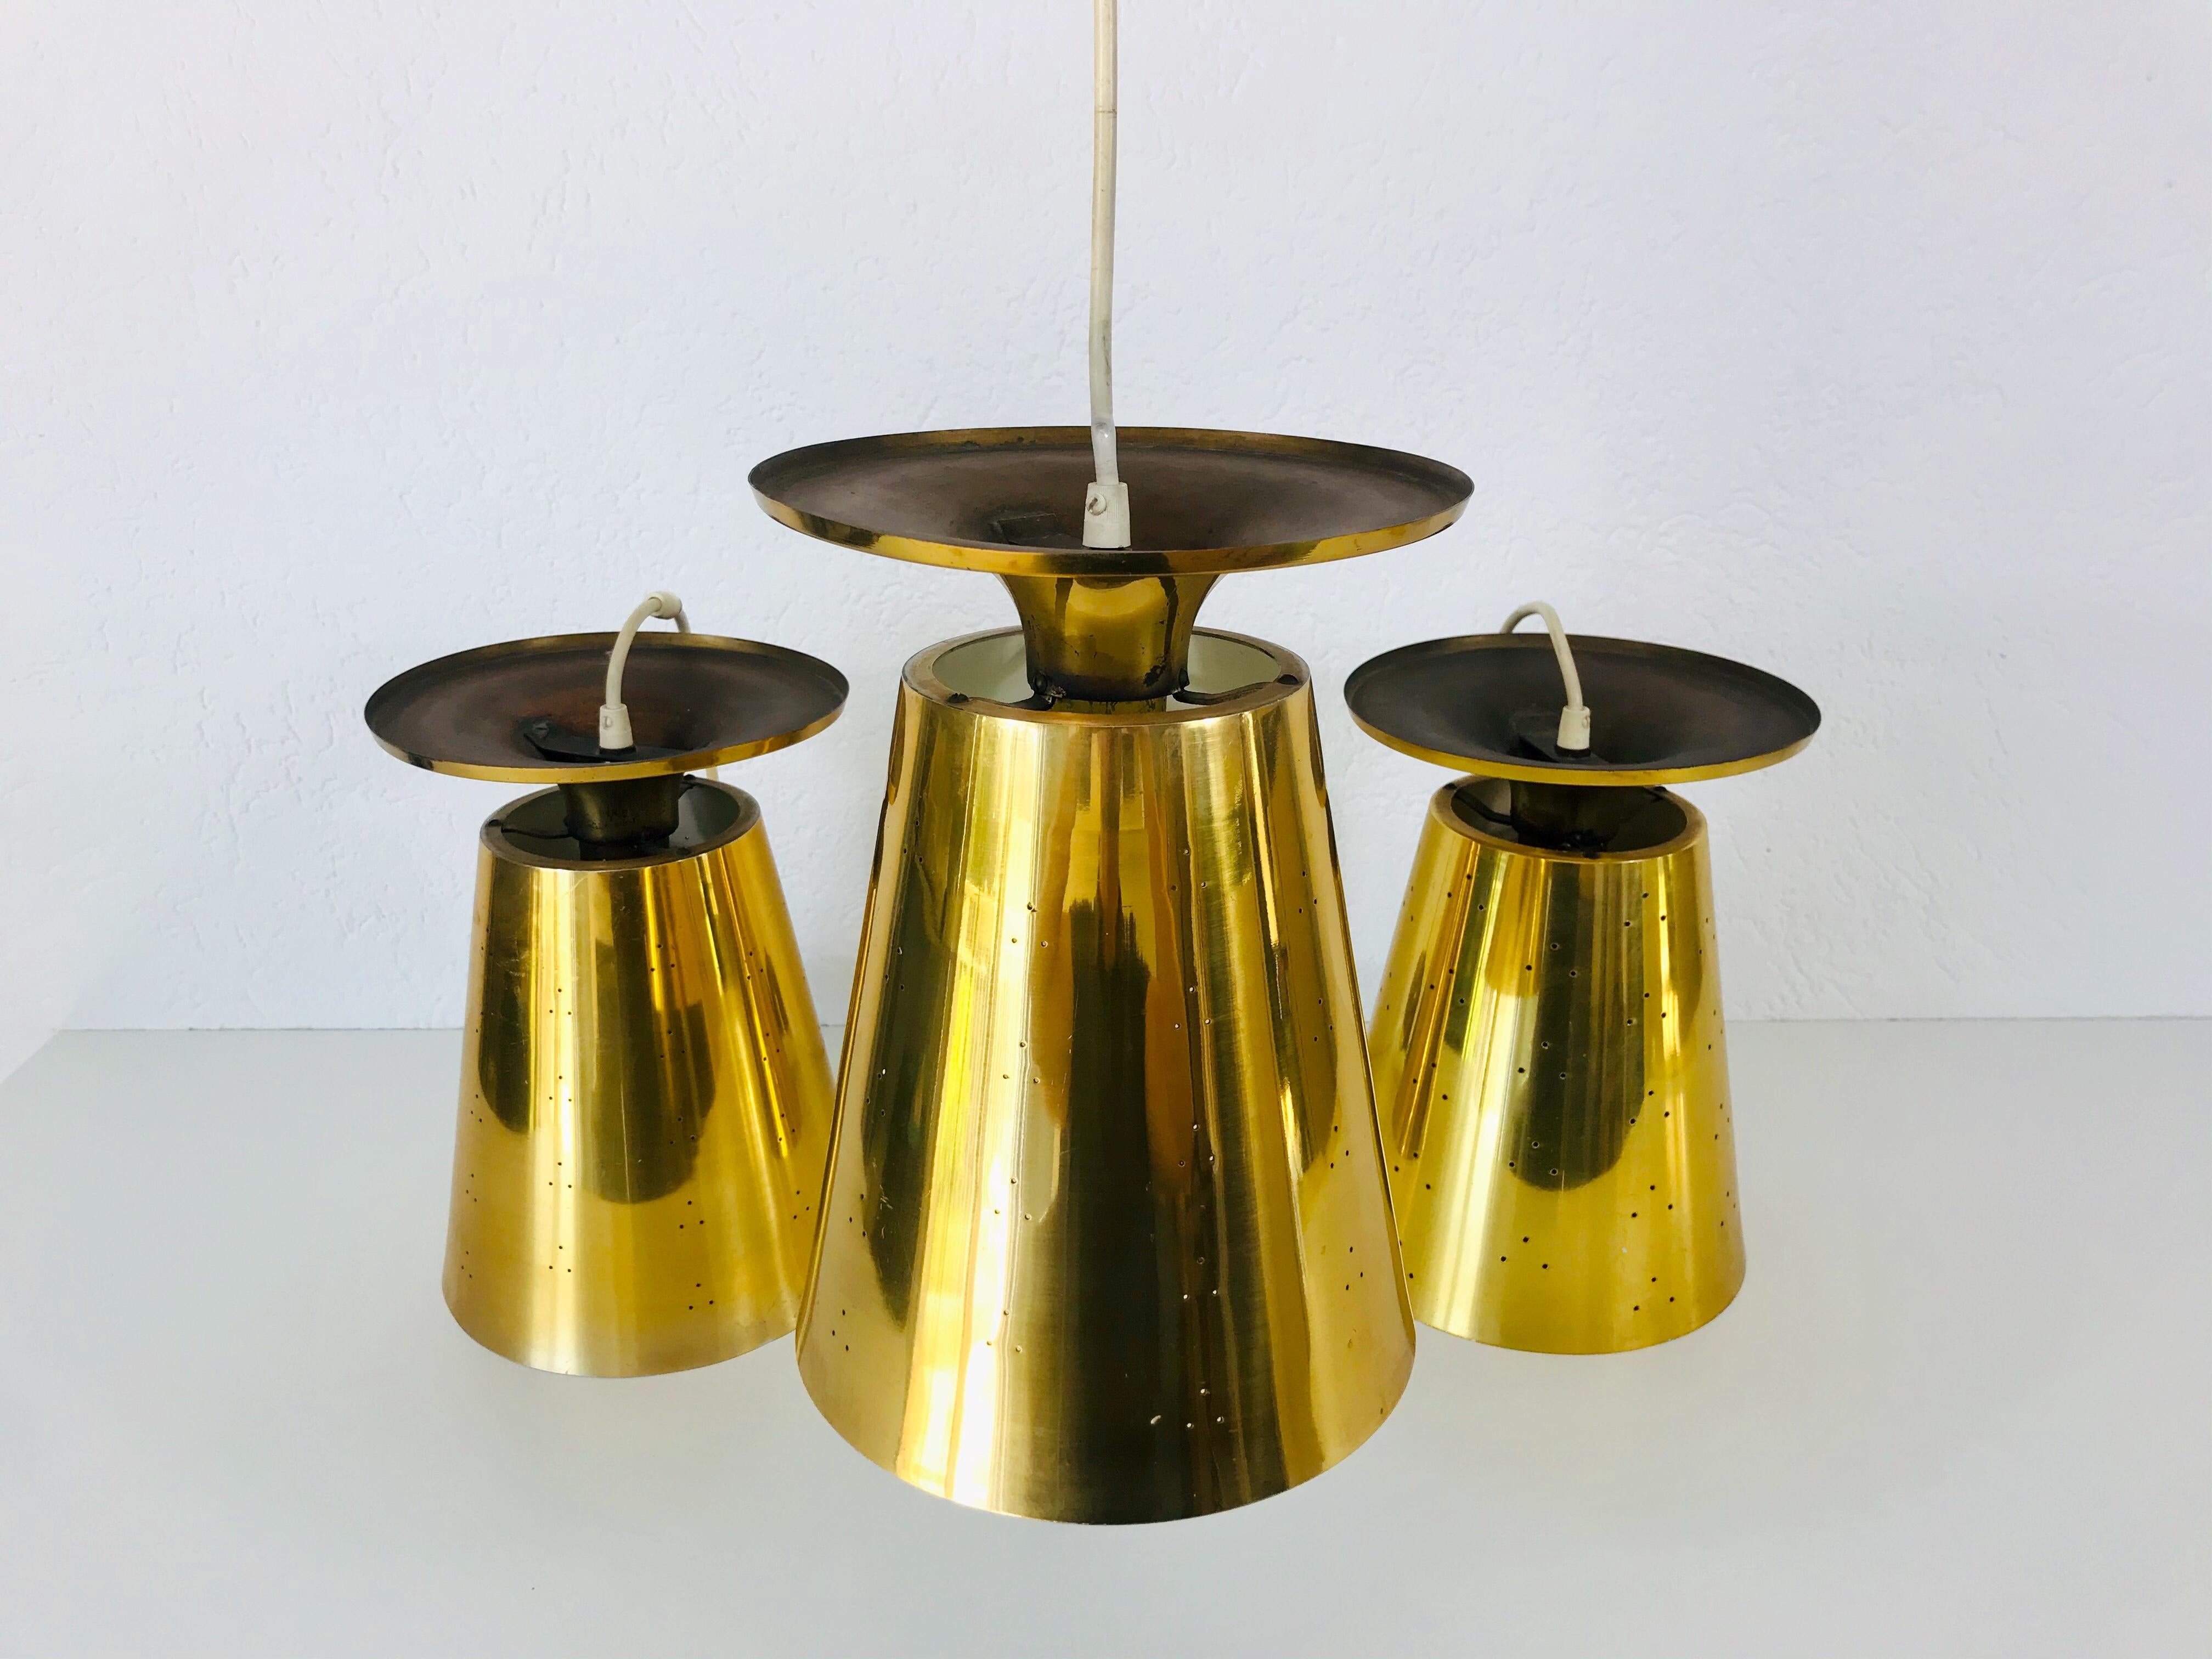 Set of 3 Polished Brass Pendant Lamps Attributed to Paavo Tynell, 1950s For Sale 6